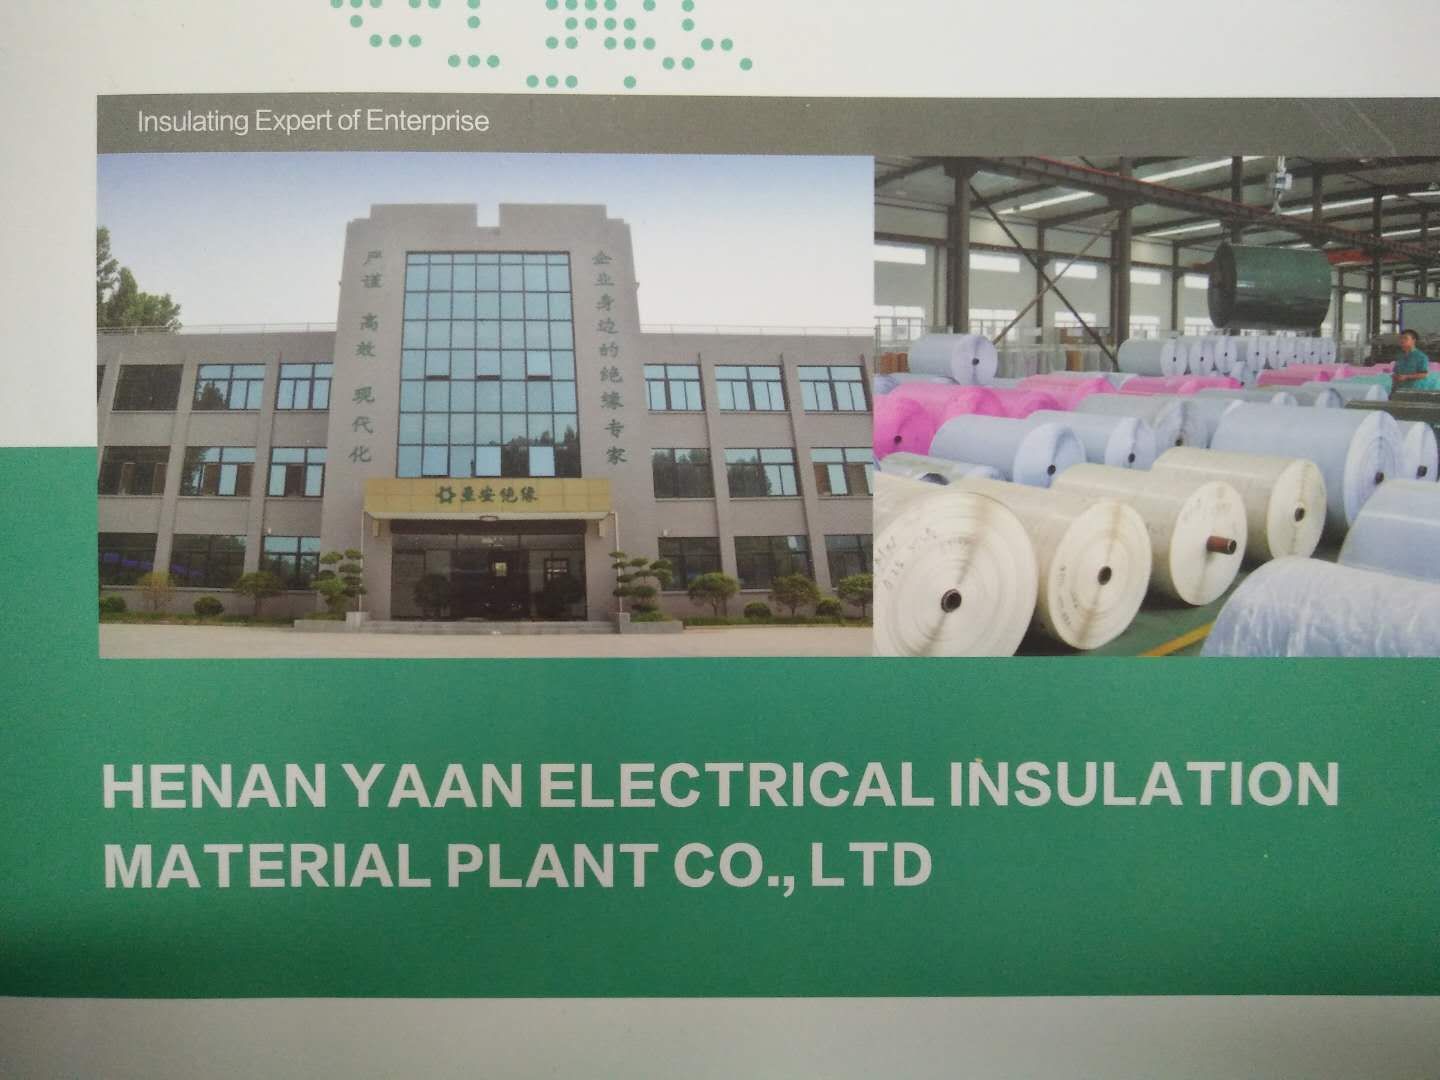 HENAN YAAN ELECTRICAL INSULATION MATERIAL PLANT CO., LTD logo